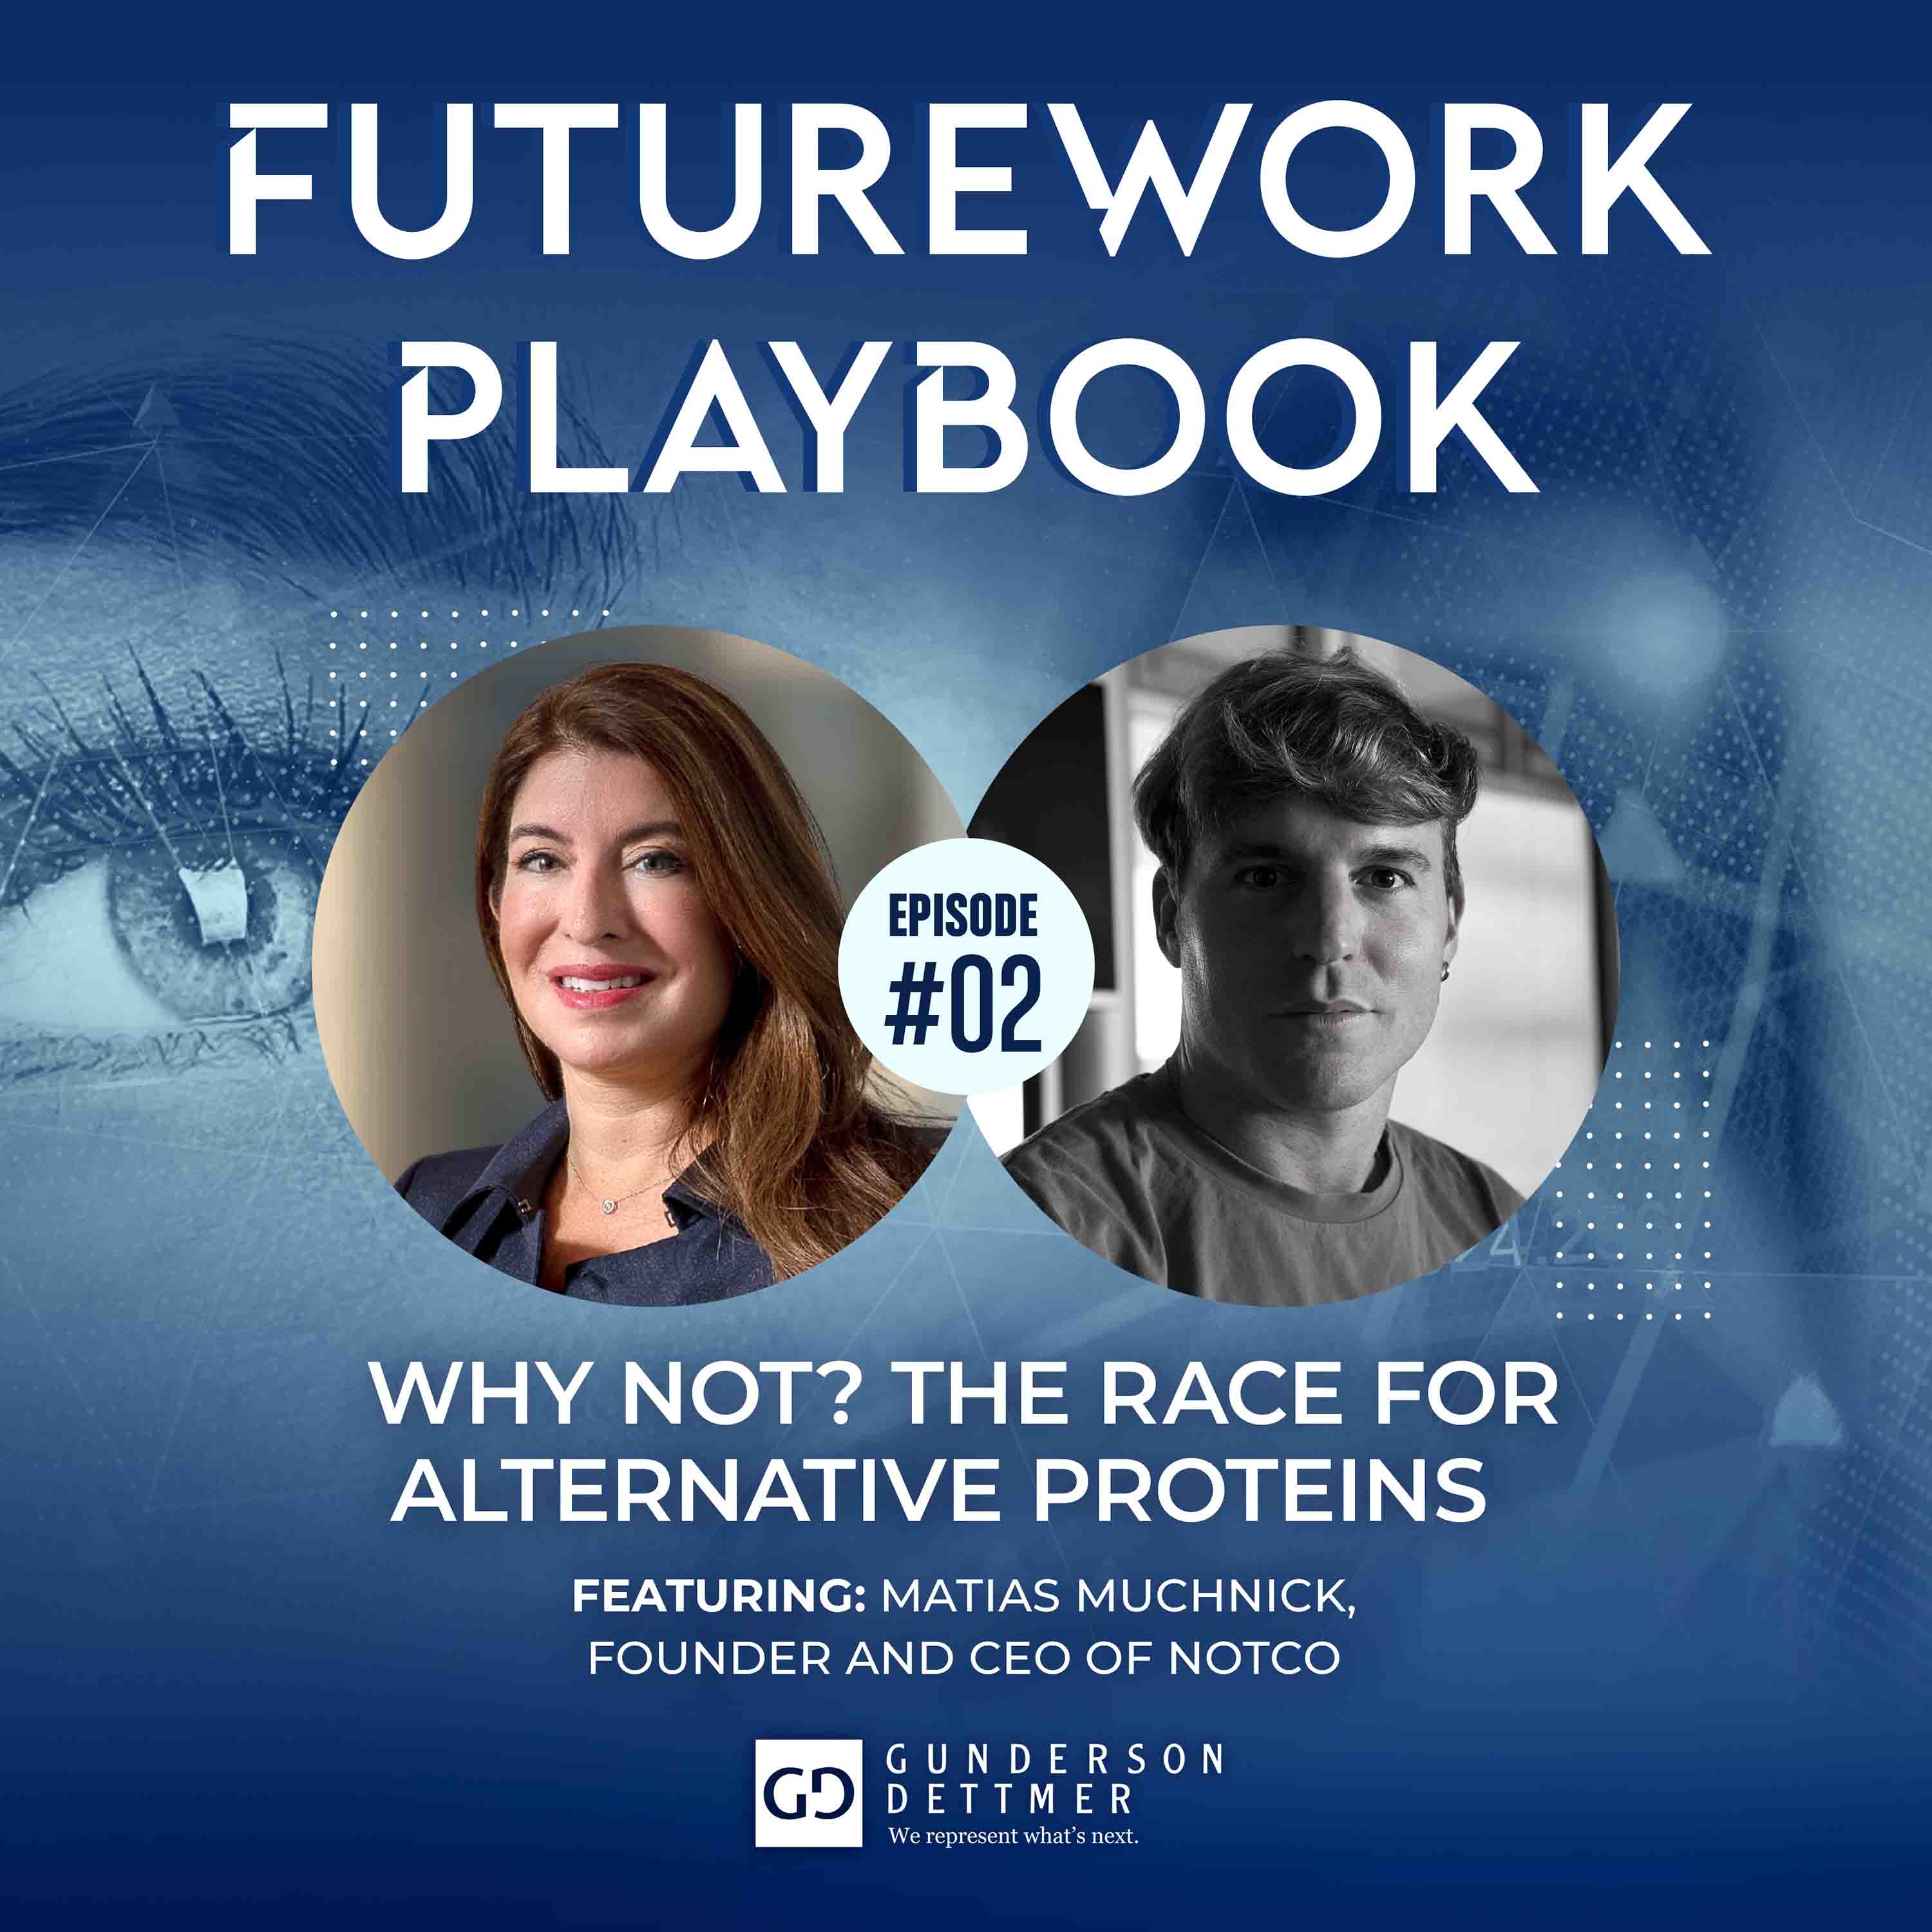 Why Not? The Race for Alternative Proteins